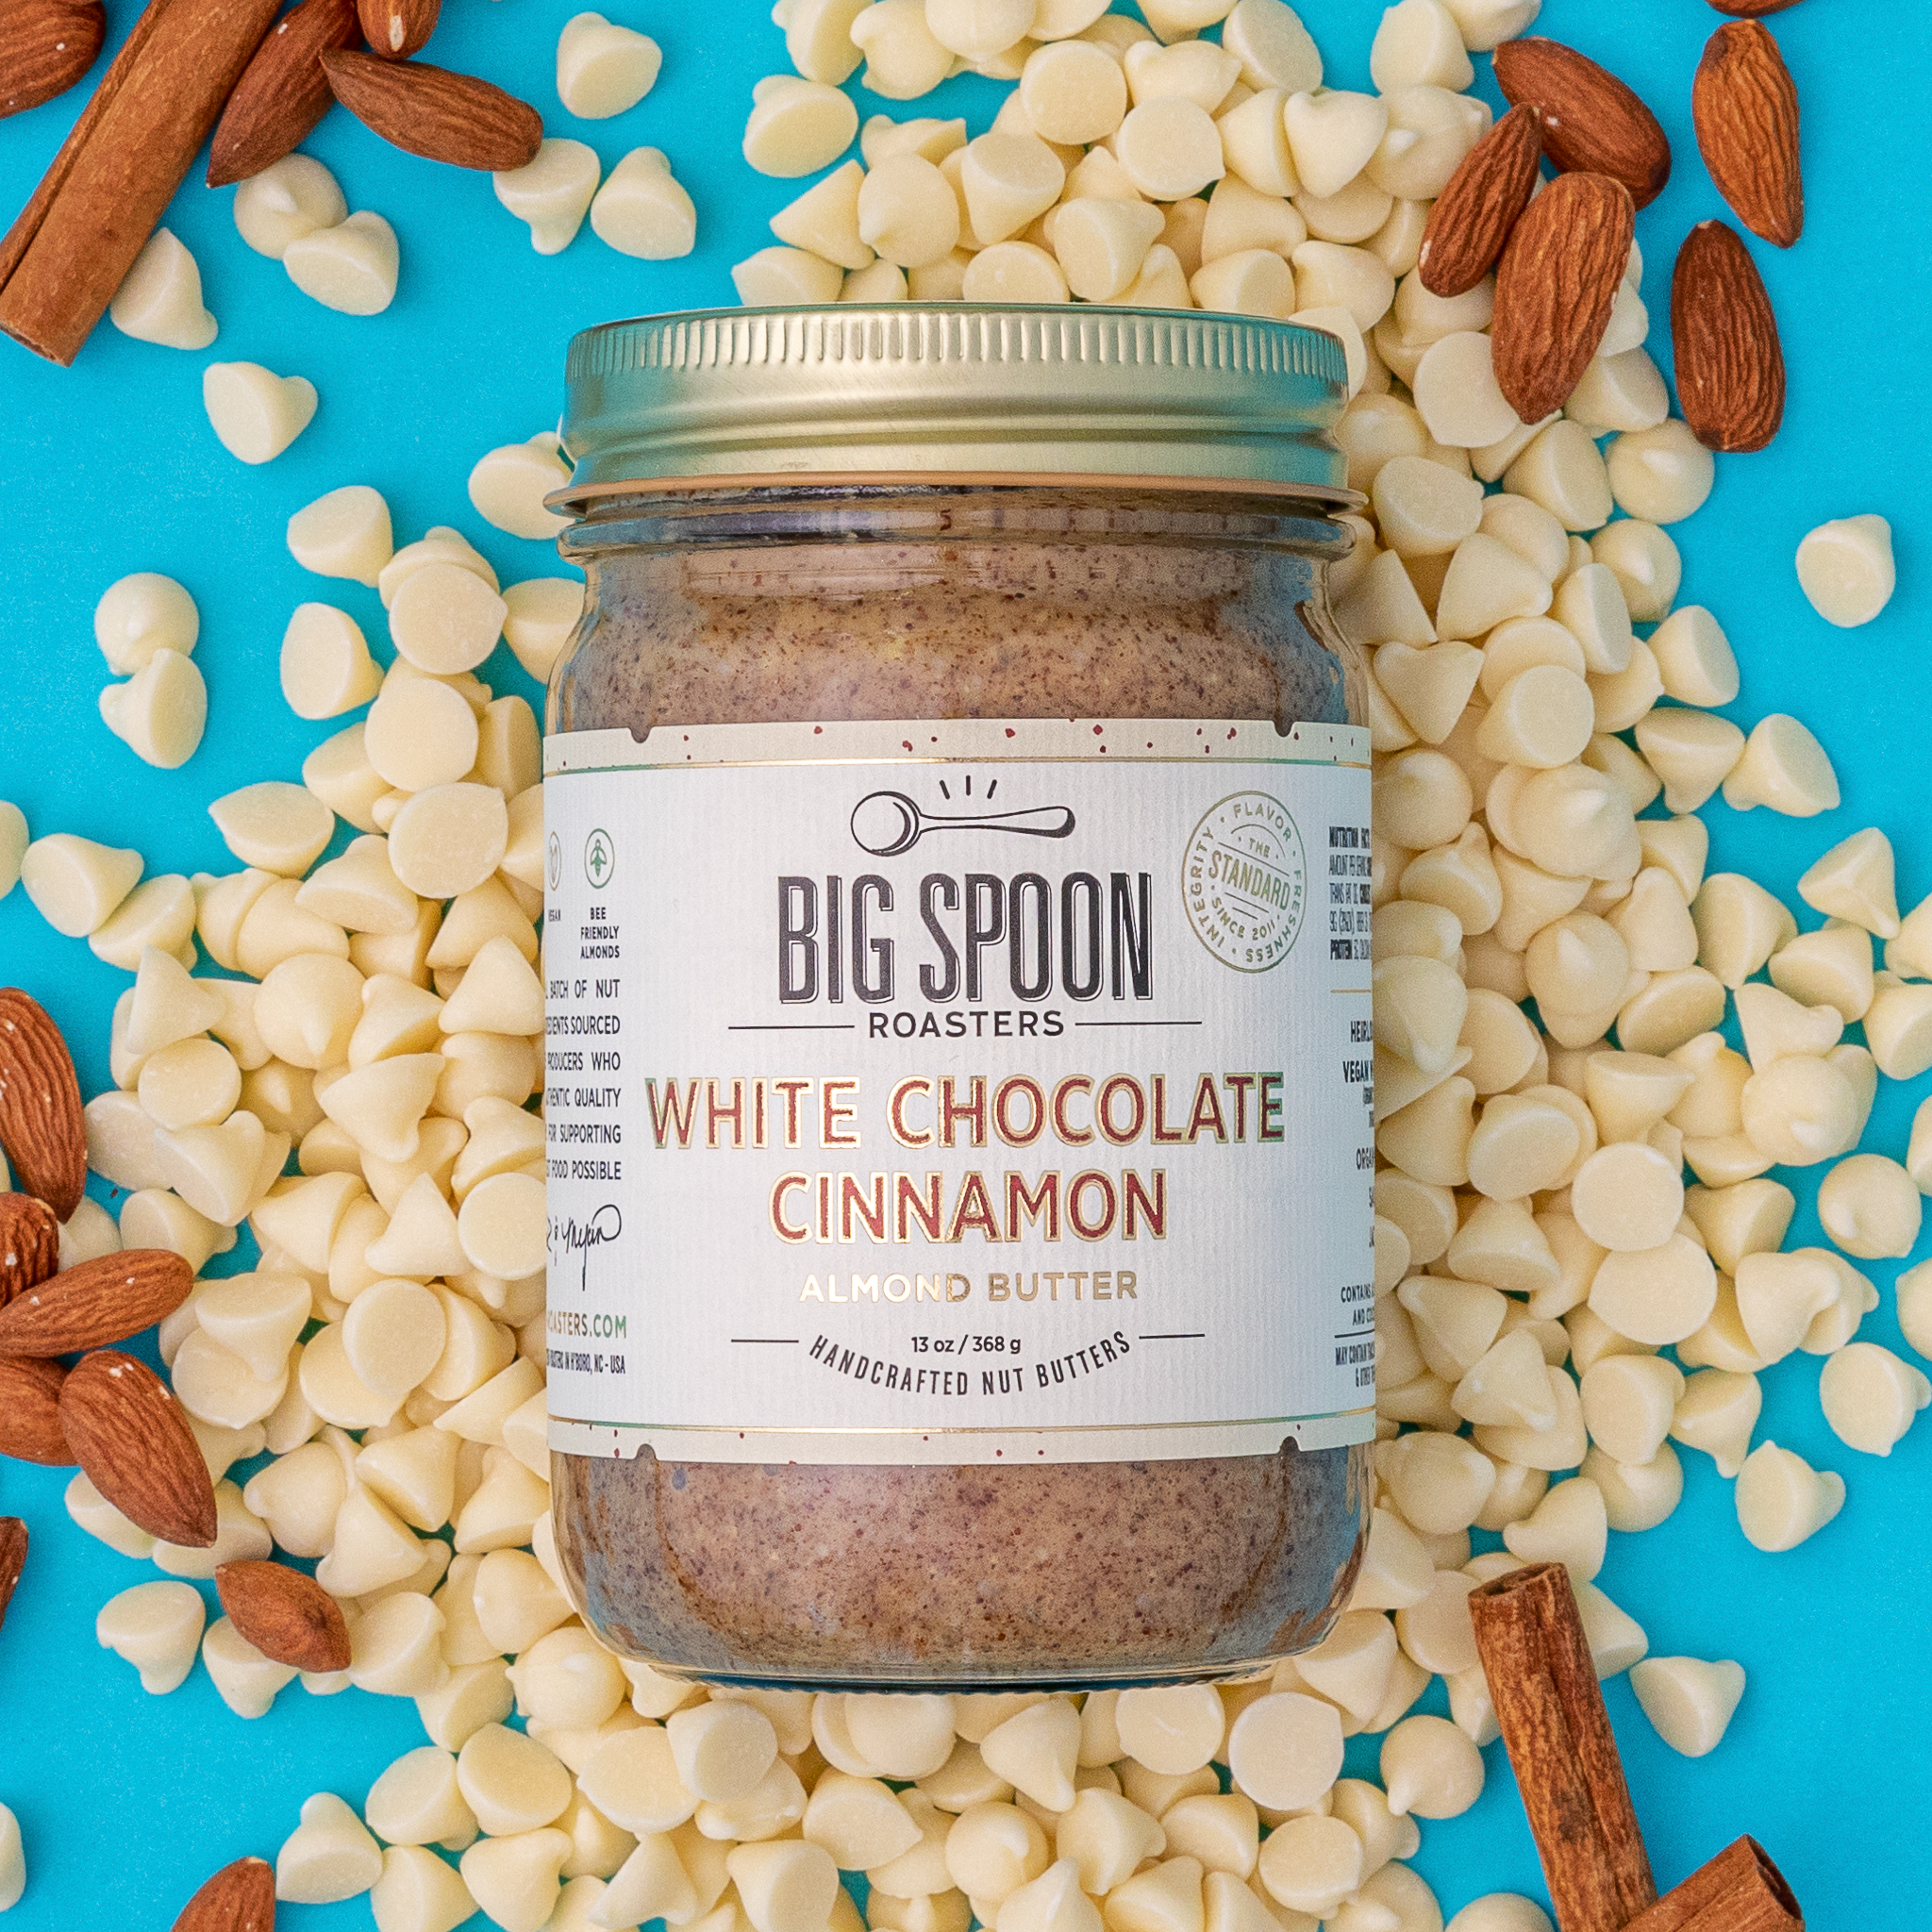 Introducing: White Chocolate Cinnamon Almond Butter